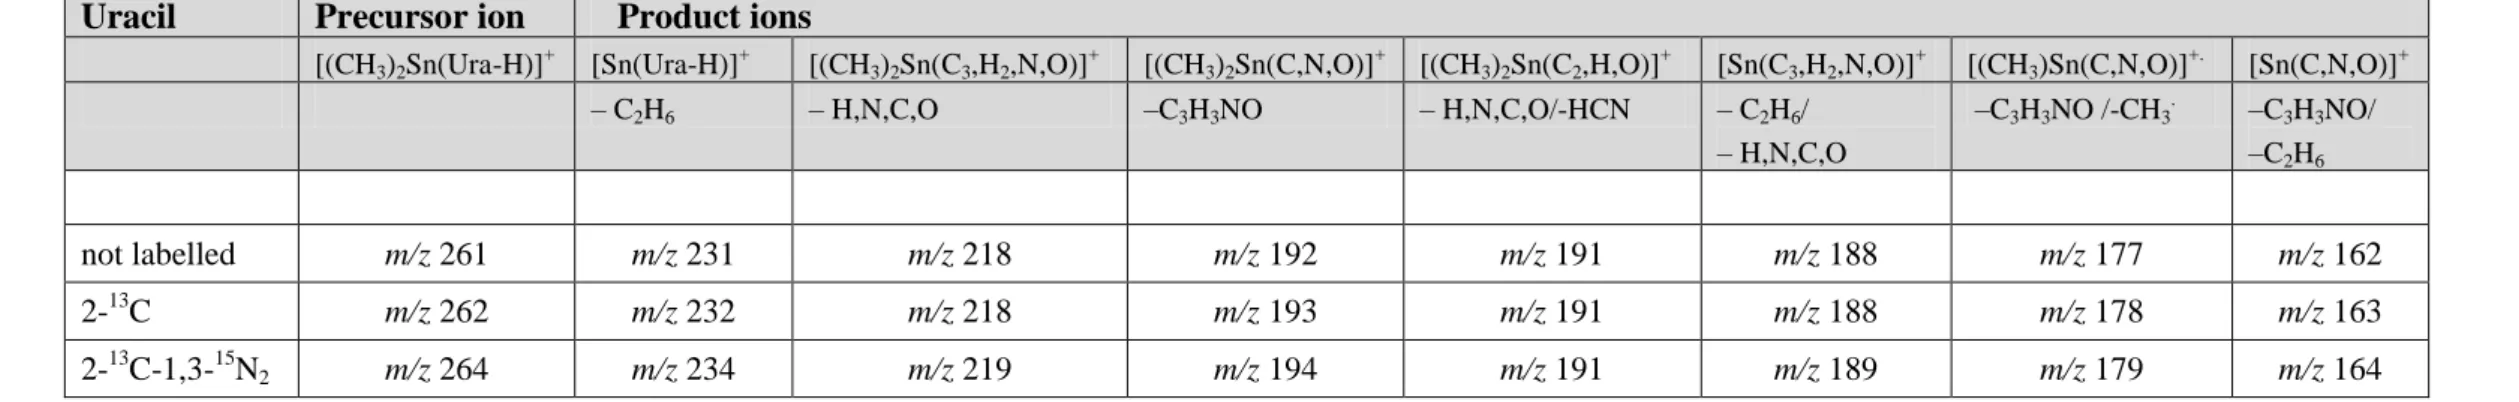 Table 1: product ions observed in the fragmentation of different labeled uracil [(CH 3 ) 2 Sn(Ura-H)] +  complexes